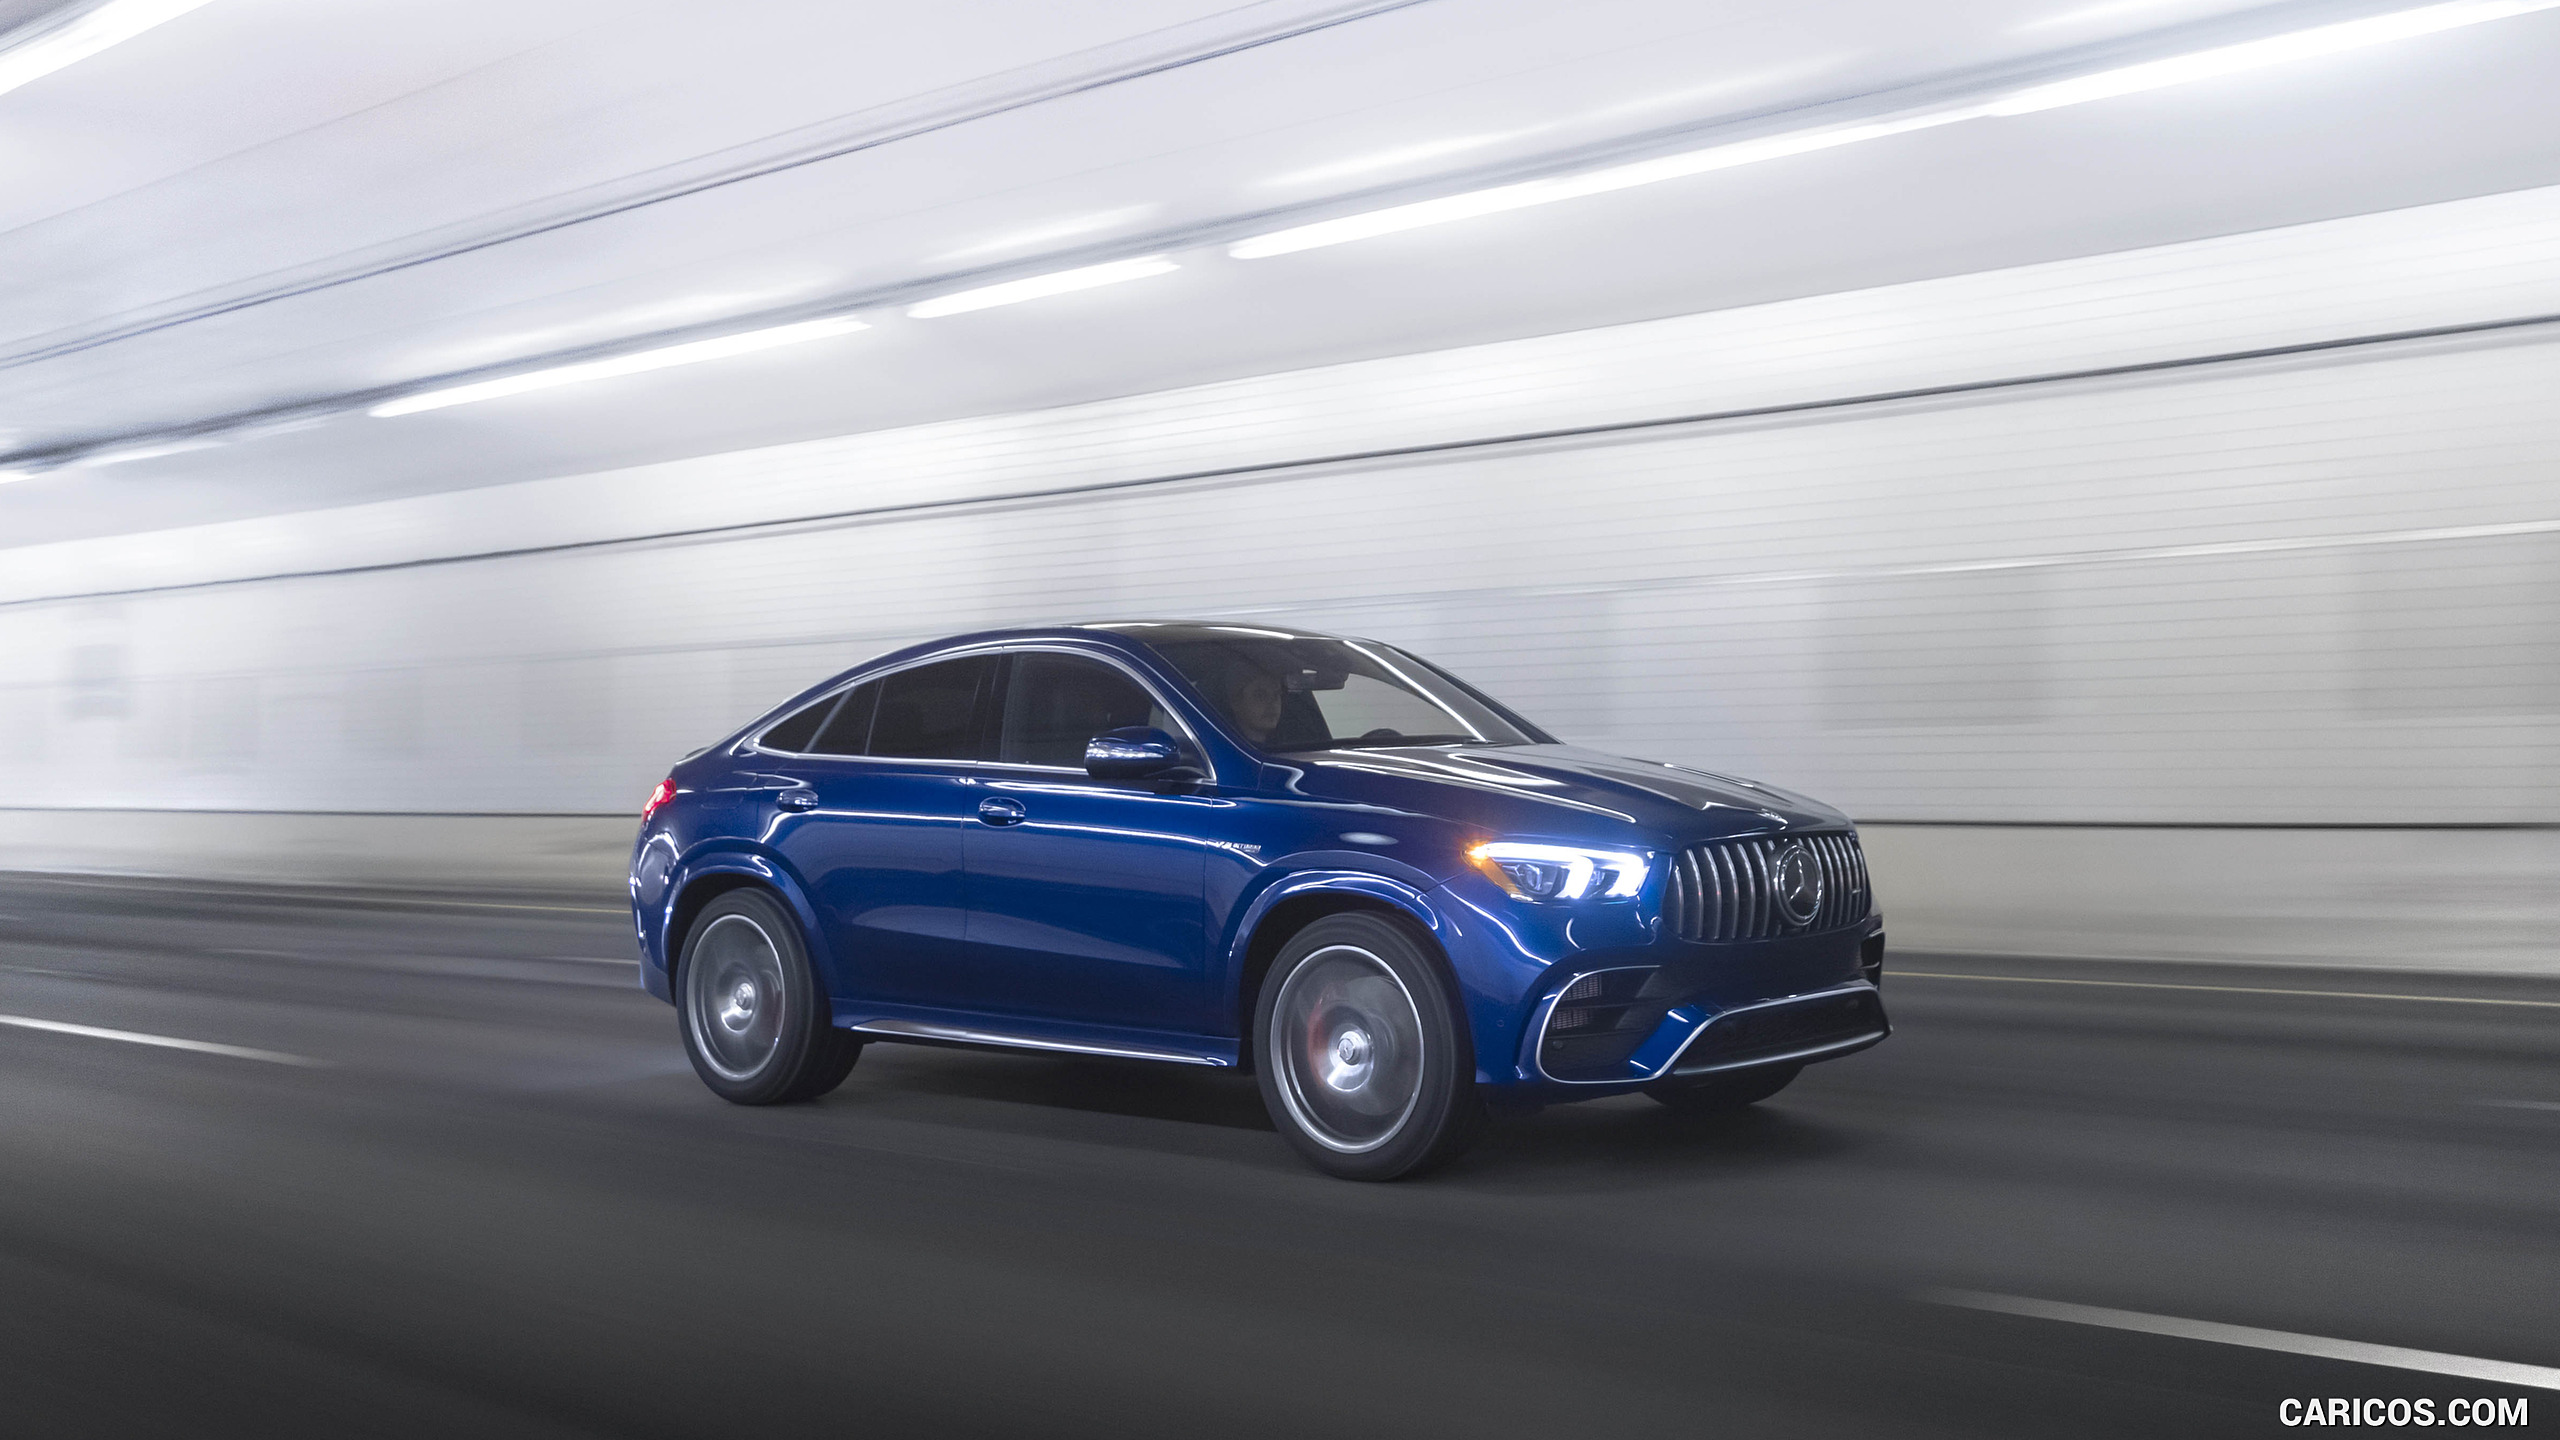 2021 Mercedes-AMG GLE 63 S Coupe (US-Spec) - Front Three-Quarter, #32 of 66